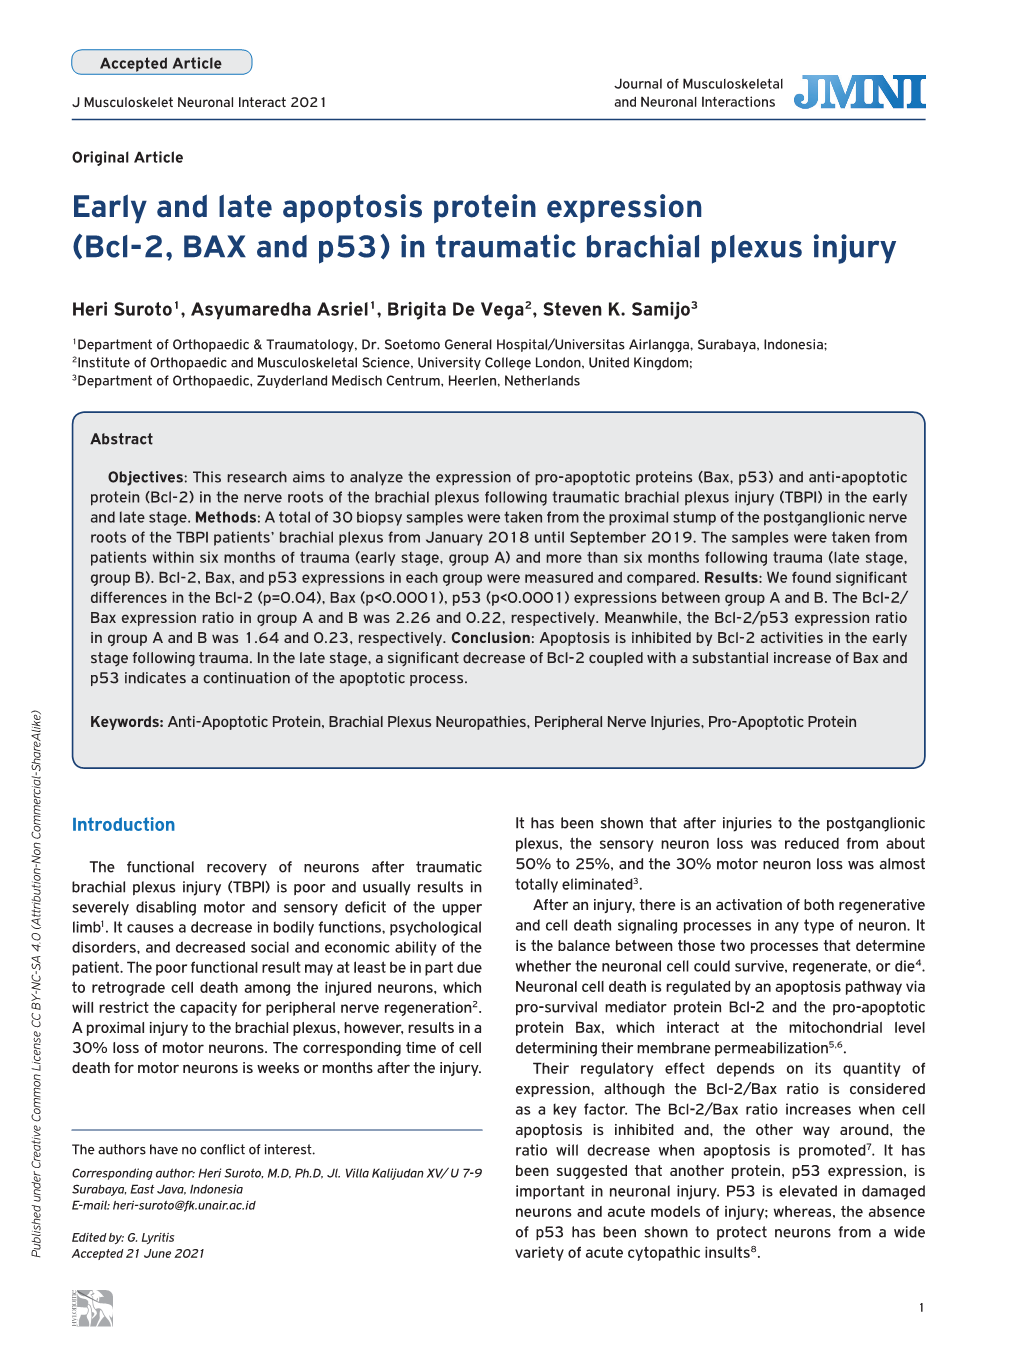 Early and Late Apoptosis Protein Expression (Bcl-2, BAX and P53) in Traumatic Brachial Plexus Injury